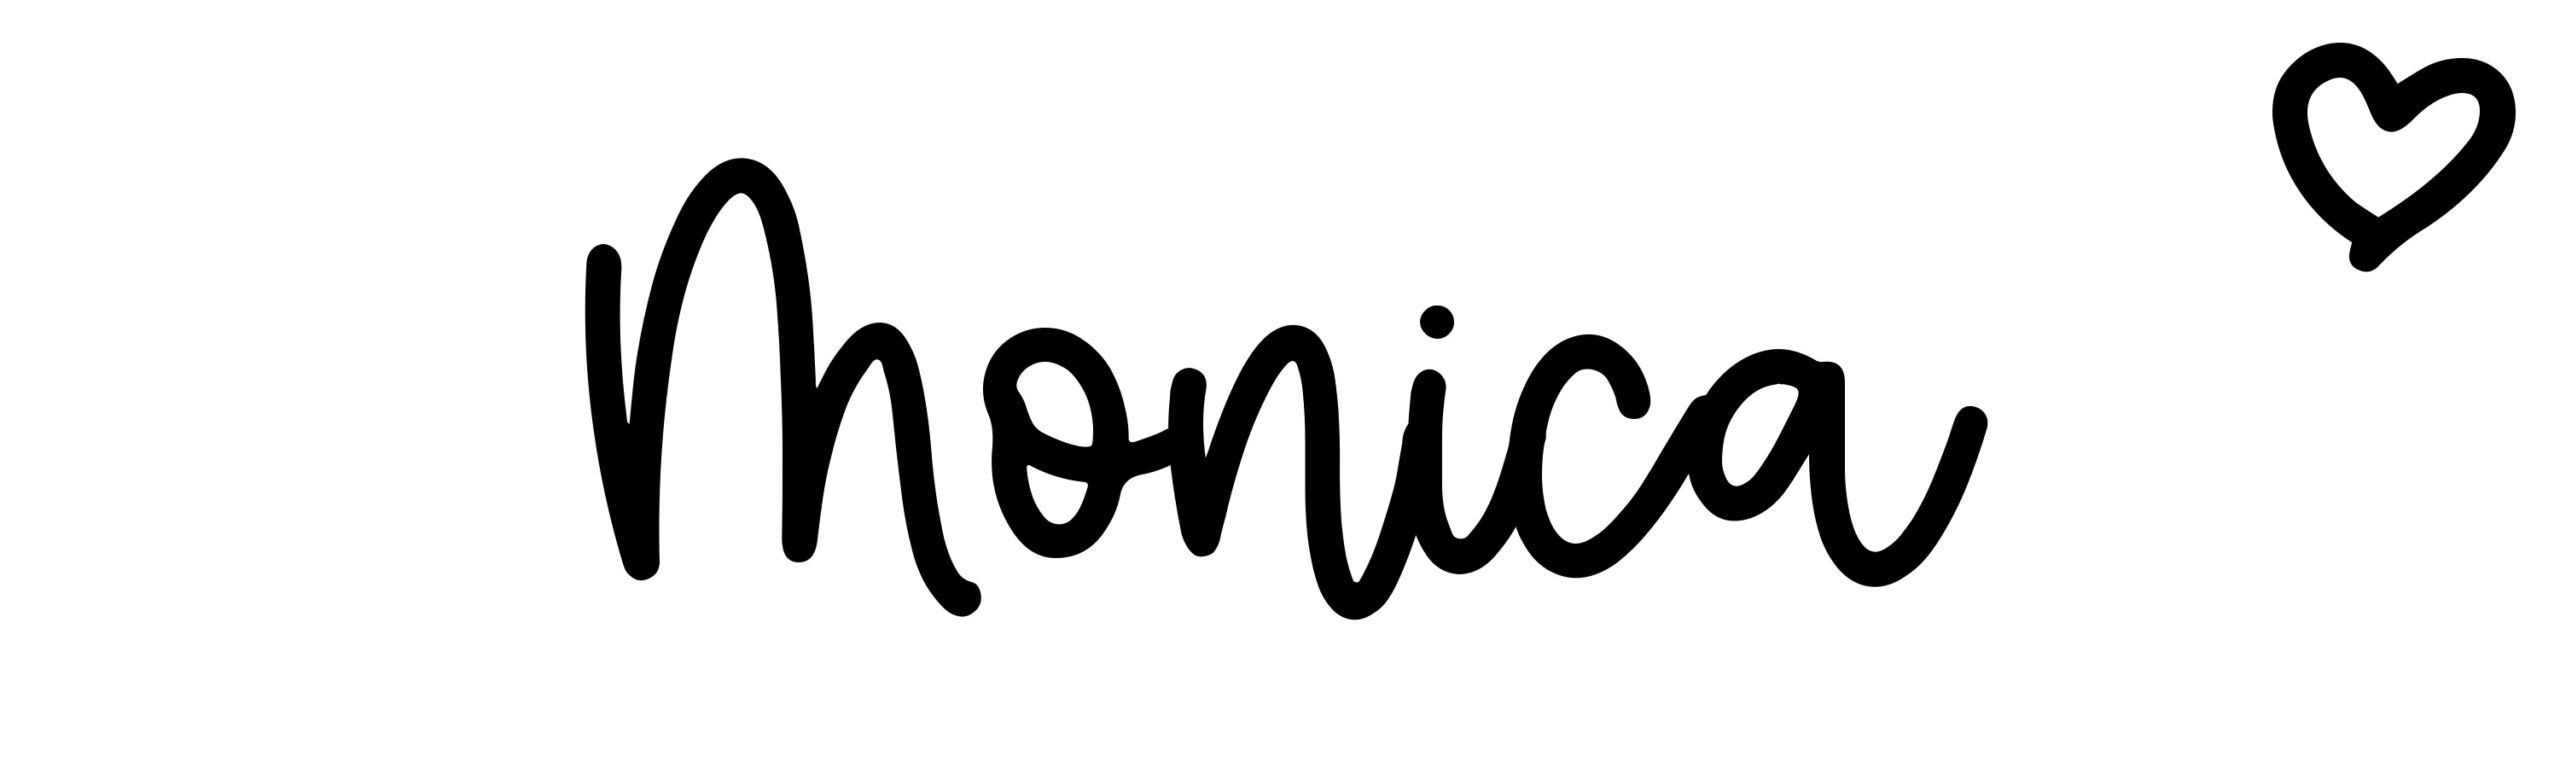 Monica - Name meaning, origin, variations and more